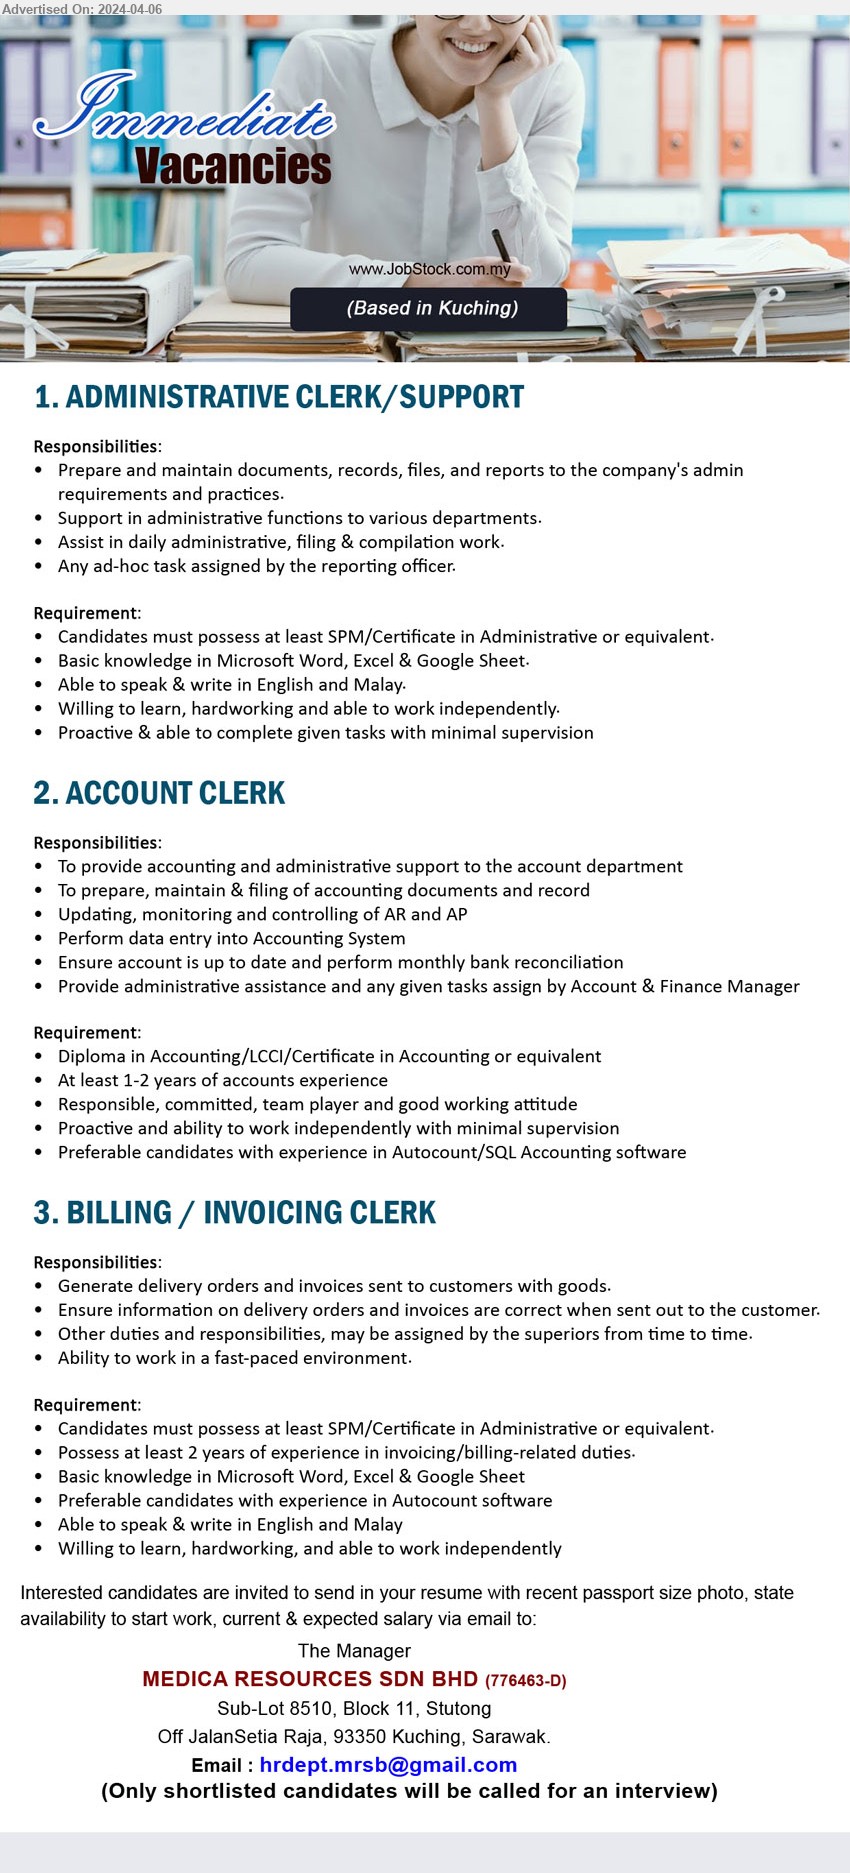 MEDICA RESOURCES SDN BHD - 1. ADMINISTRATIVE CLERK/SUPPORT   (Kuching), SPM/Certificate in Administrative, Basic knowledge in Microsoft Word, Excel & Google Sheet.,...
2. ACCOUNT CLERK (Kuching), Diploma in Accounting/LCCI/Certificate in Accounting, 1-2 yrs. exp.,...
3. BILLING / INVOICING CLERK (Kuching), SPM/Certificate in Administrative, 2 yrs. exp.,...
Email resume to ...